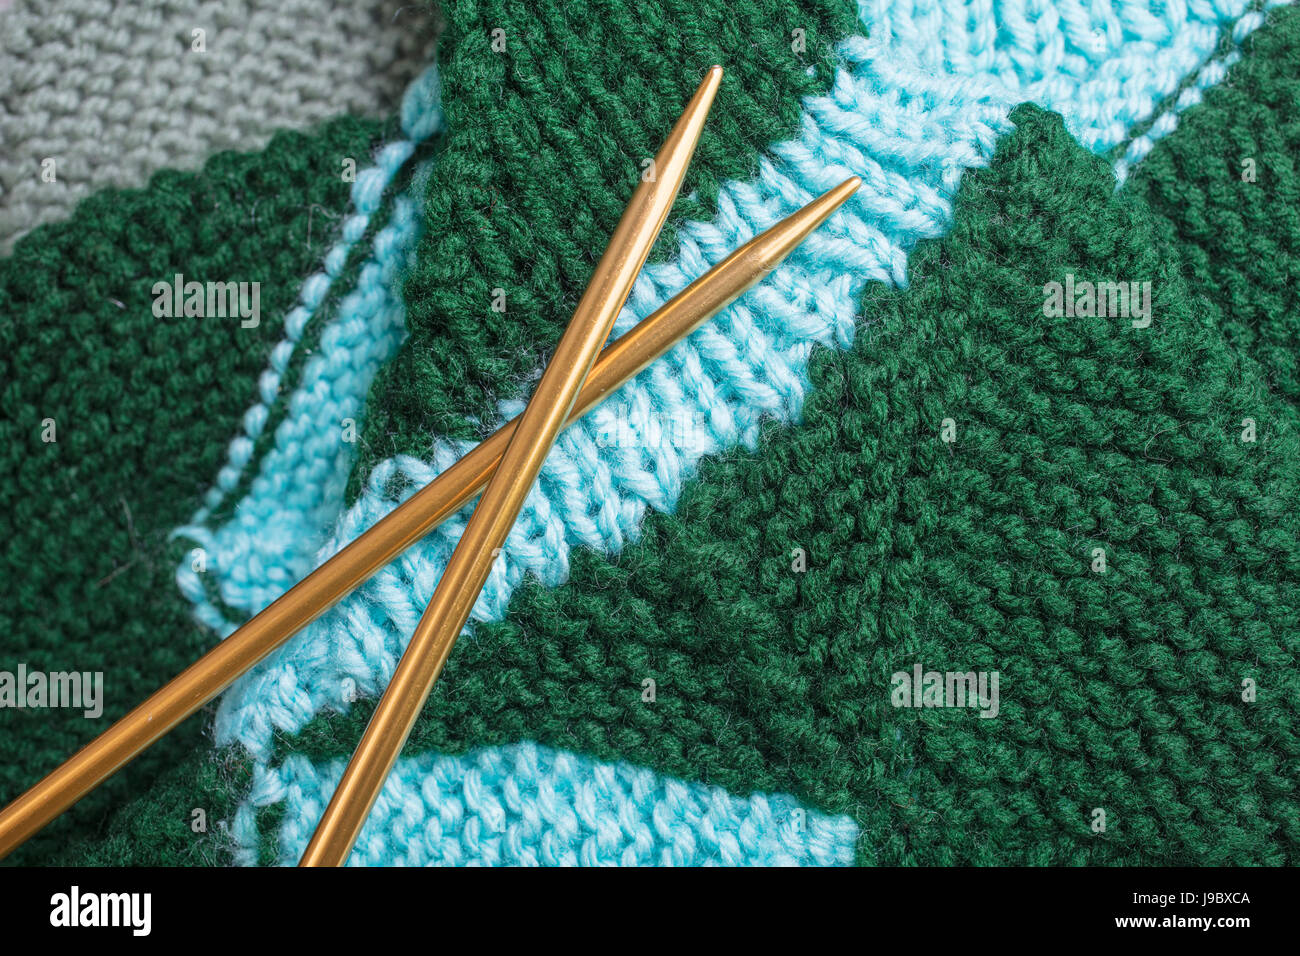 Green and teal yarn knitted socks with gold metal needles Stock Photo